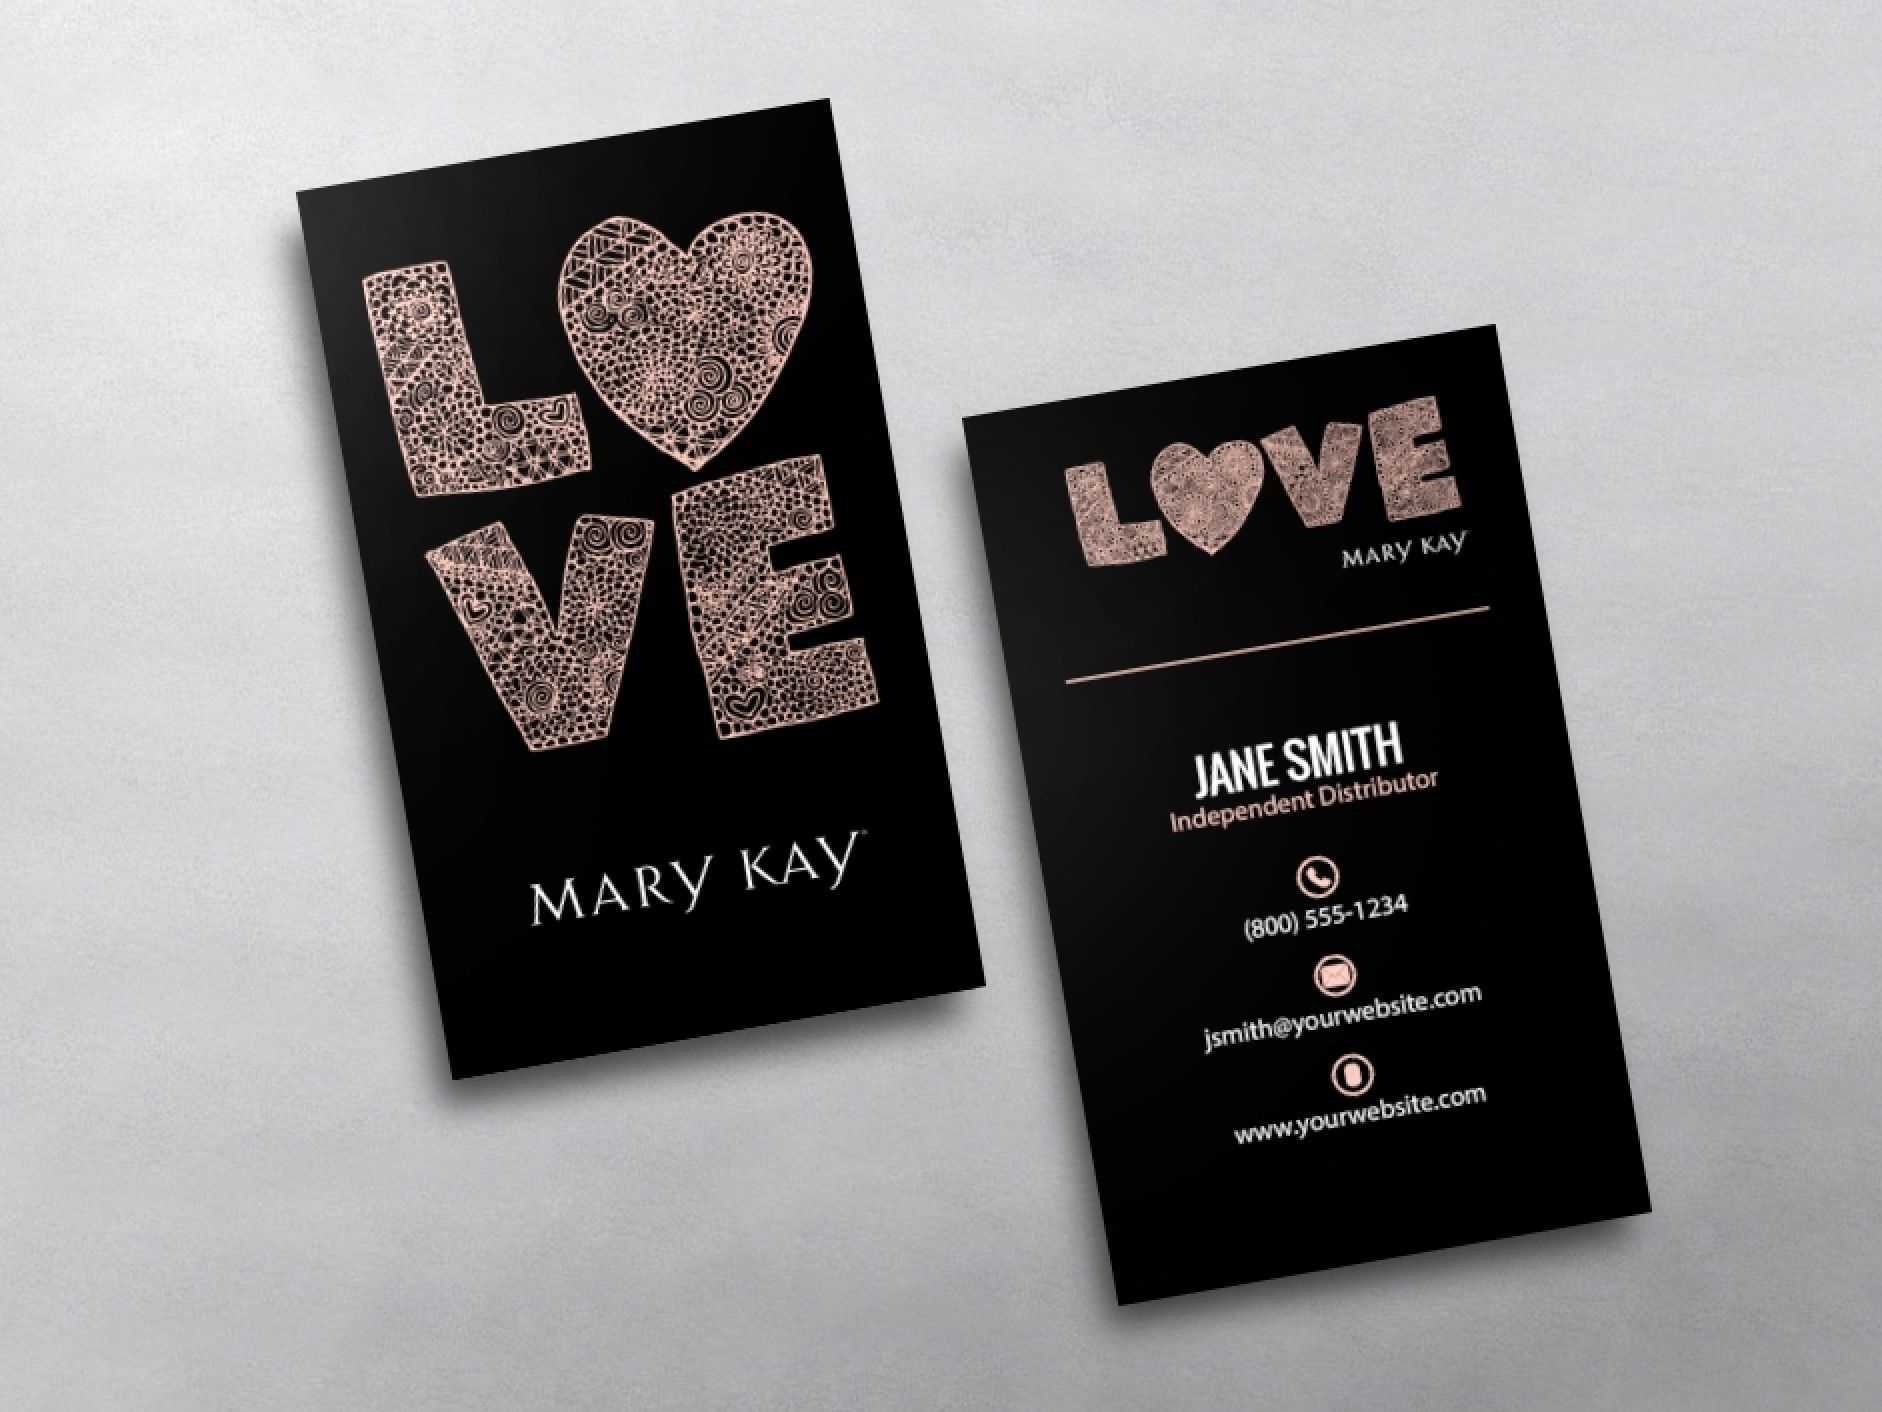 Mary Kay Business Cards | Business Card Templates In 2019 For Mary Kay Business Cards Templates Free